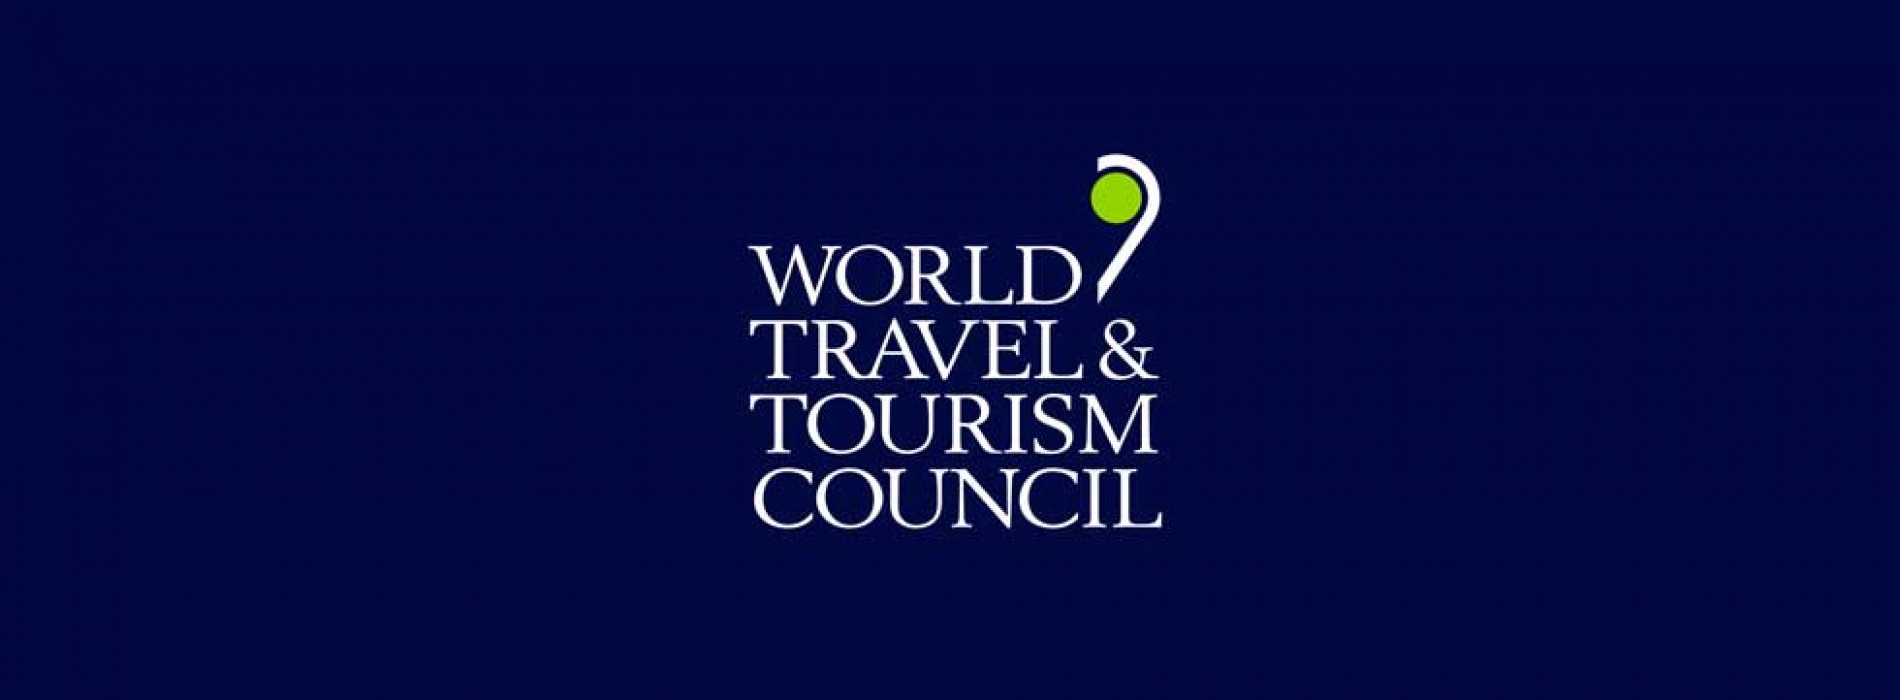 India’s is the world’s 7th largest tourism economy in terms of GDP says WTTC